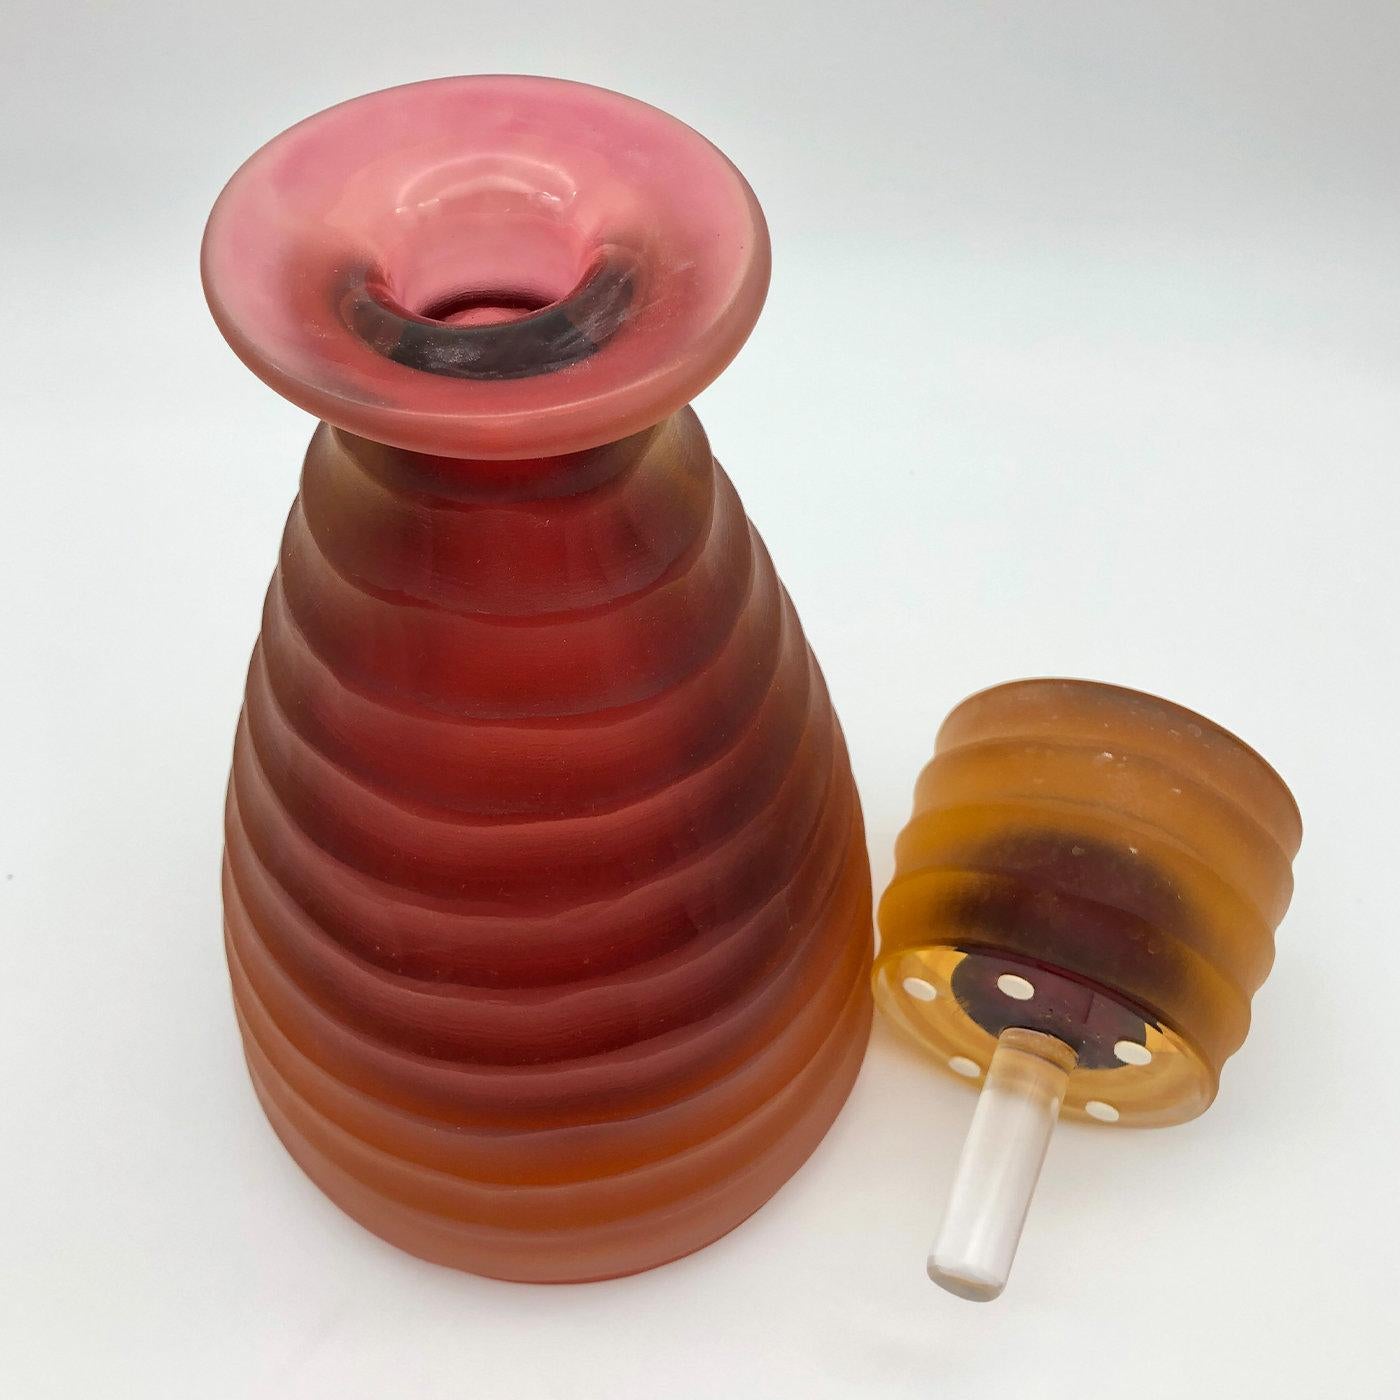 Distinguished by an alluring combination of warm amber and ruby hues, this exceptional bottle will add an accent of color and a singular charm to any dining table. Meticulously handcrafted and carved by hand by Ars Murano's master glassmaker Achille